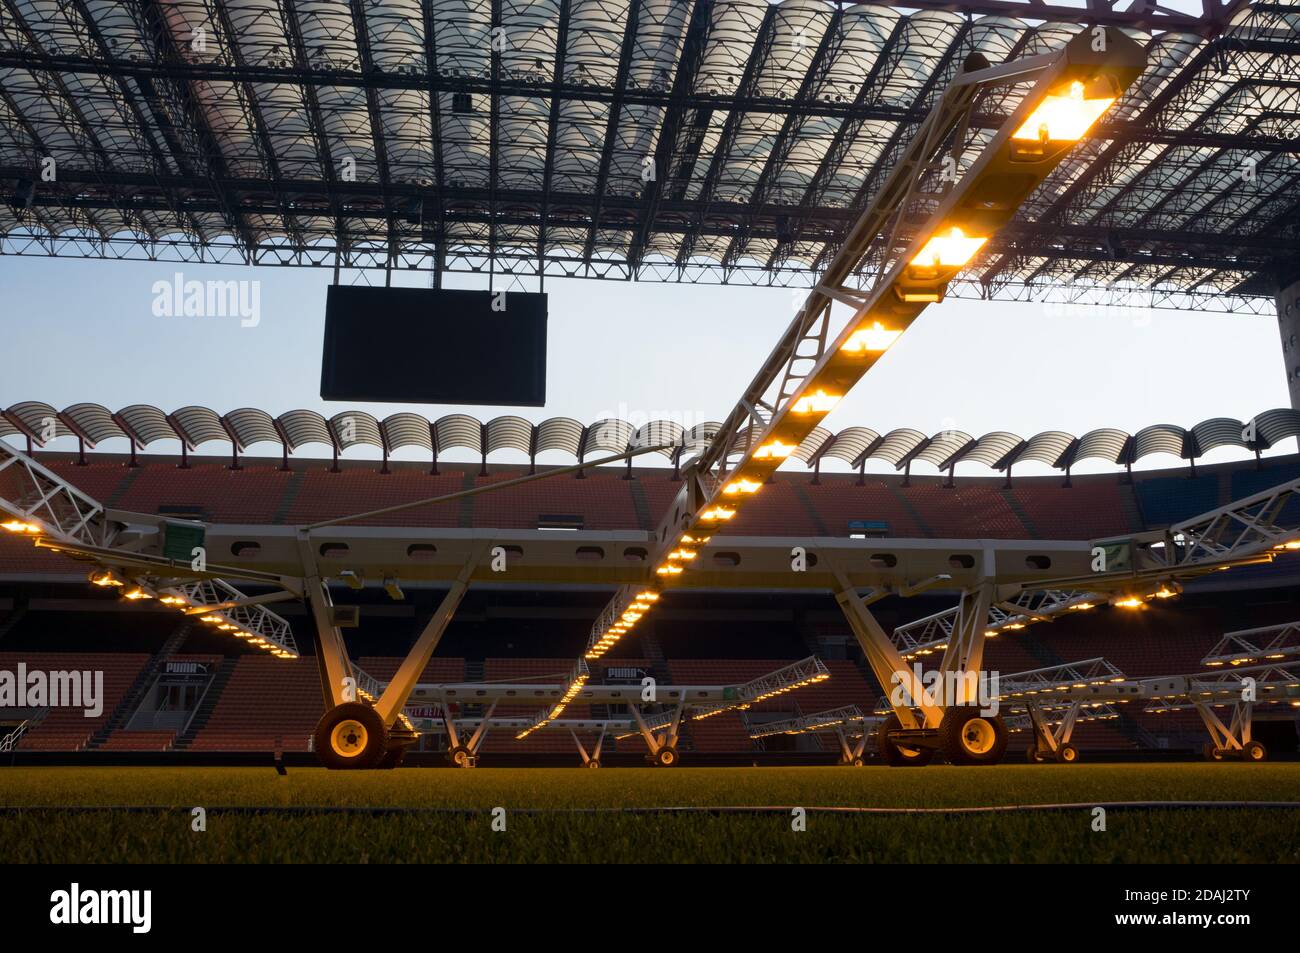 Artificial light  MLR for growing sports natural lawn illuminates the grass at the stadium Giuseppe Meazza or San Siro, built in 1925. Stock Photo